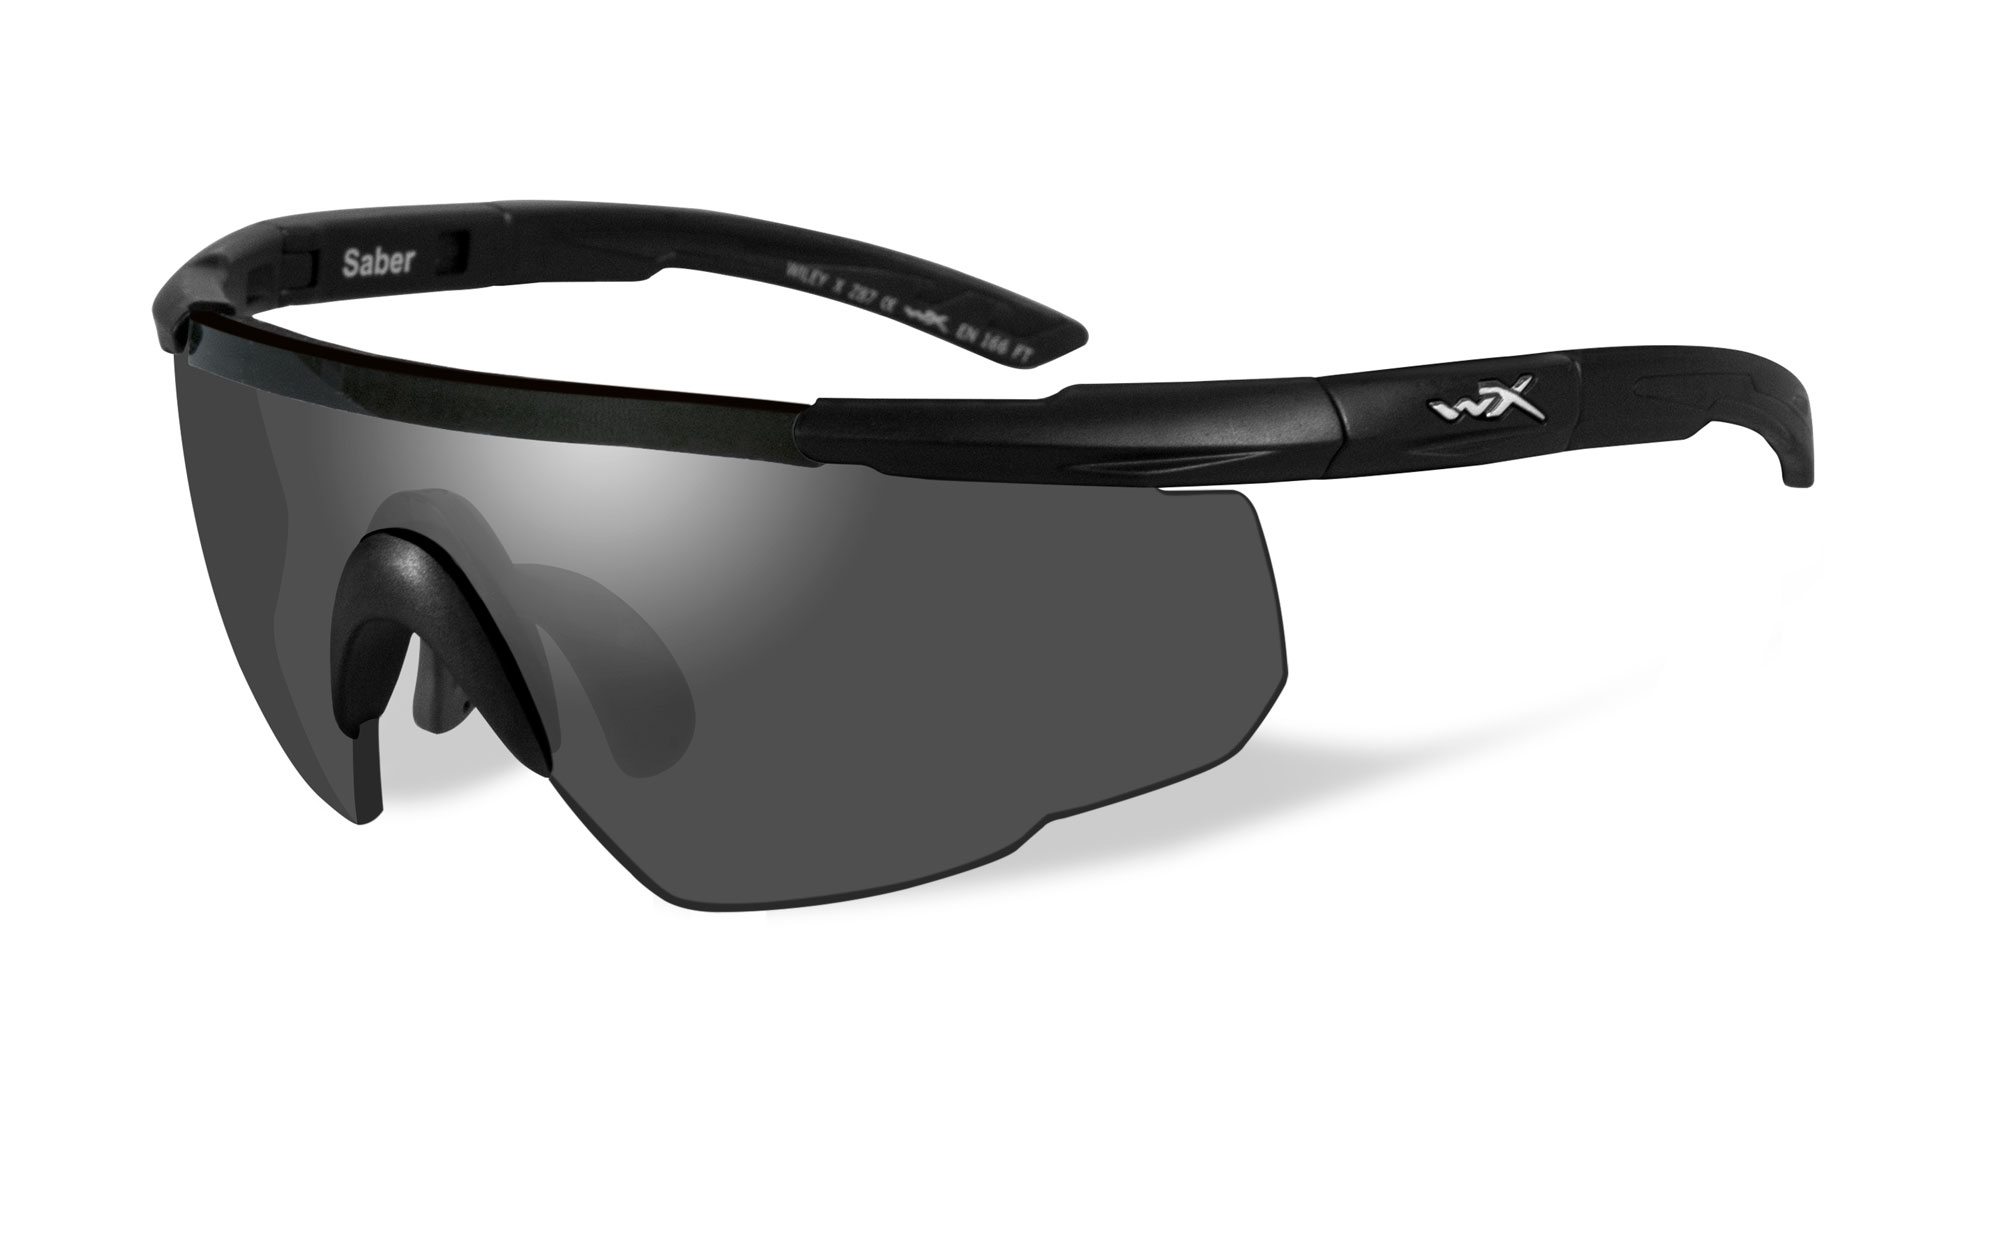 USA New Shooting Ballistic Safety Glasses Clear WILEY X ® Saber Advance 